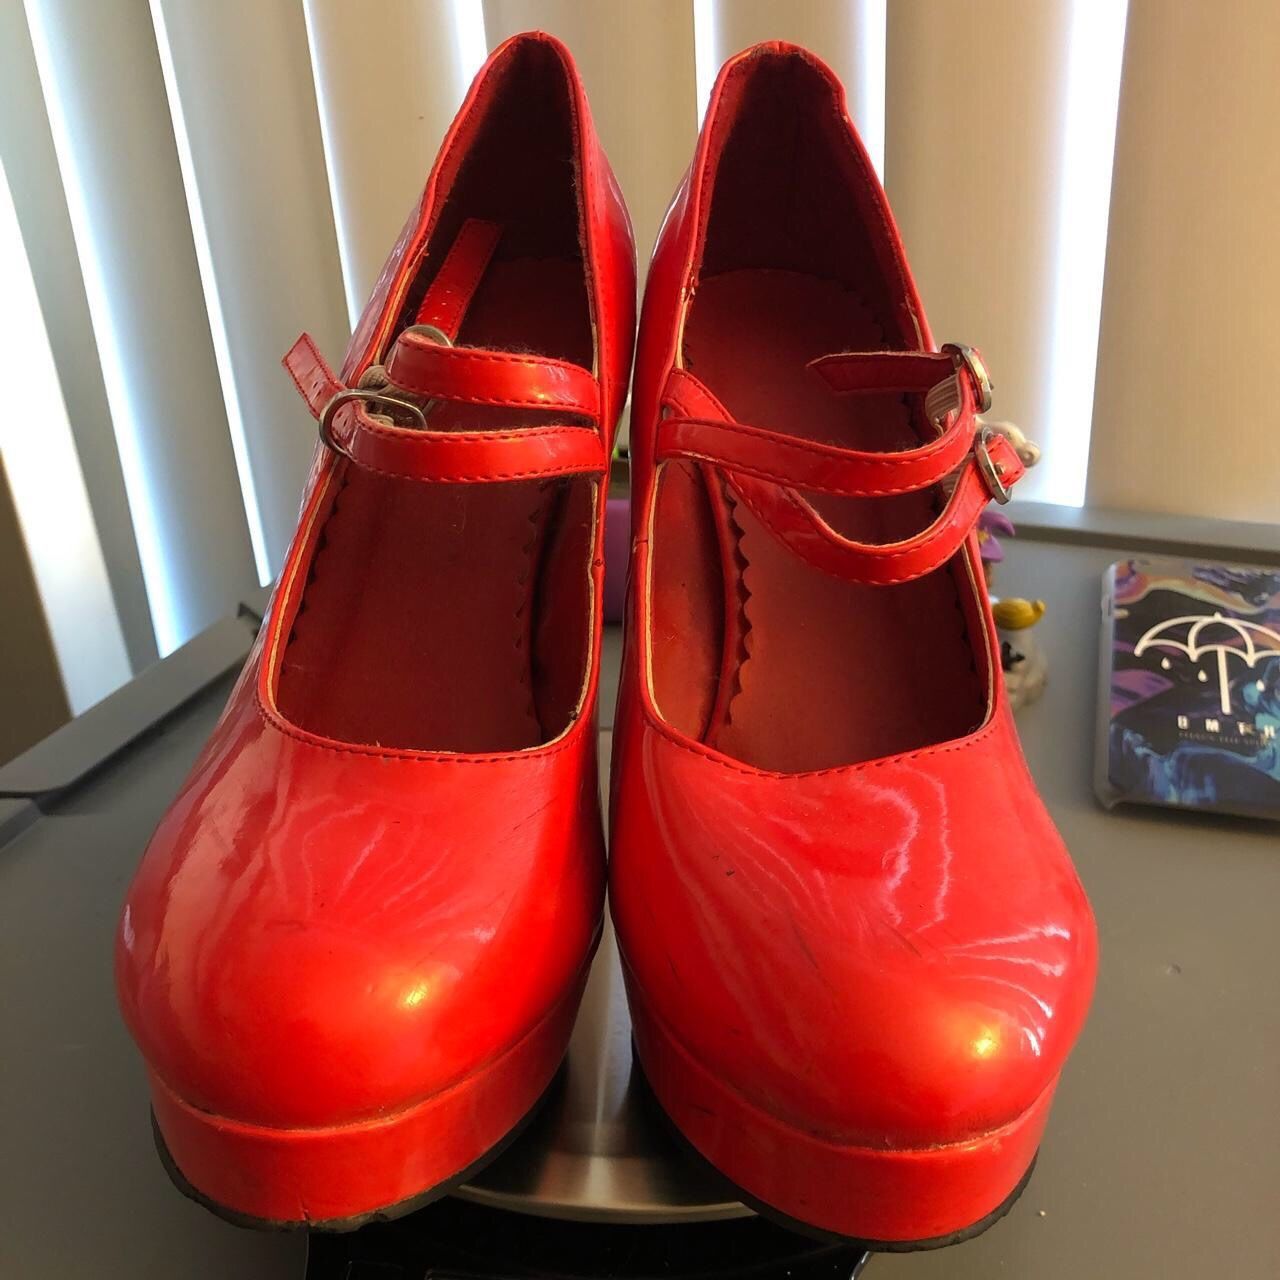 Red Heels perfect for a Halloween Costume such as Little Red Riding Hood! Size S 5-6 